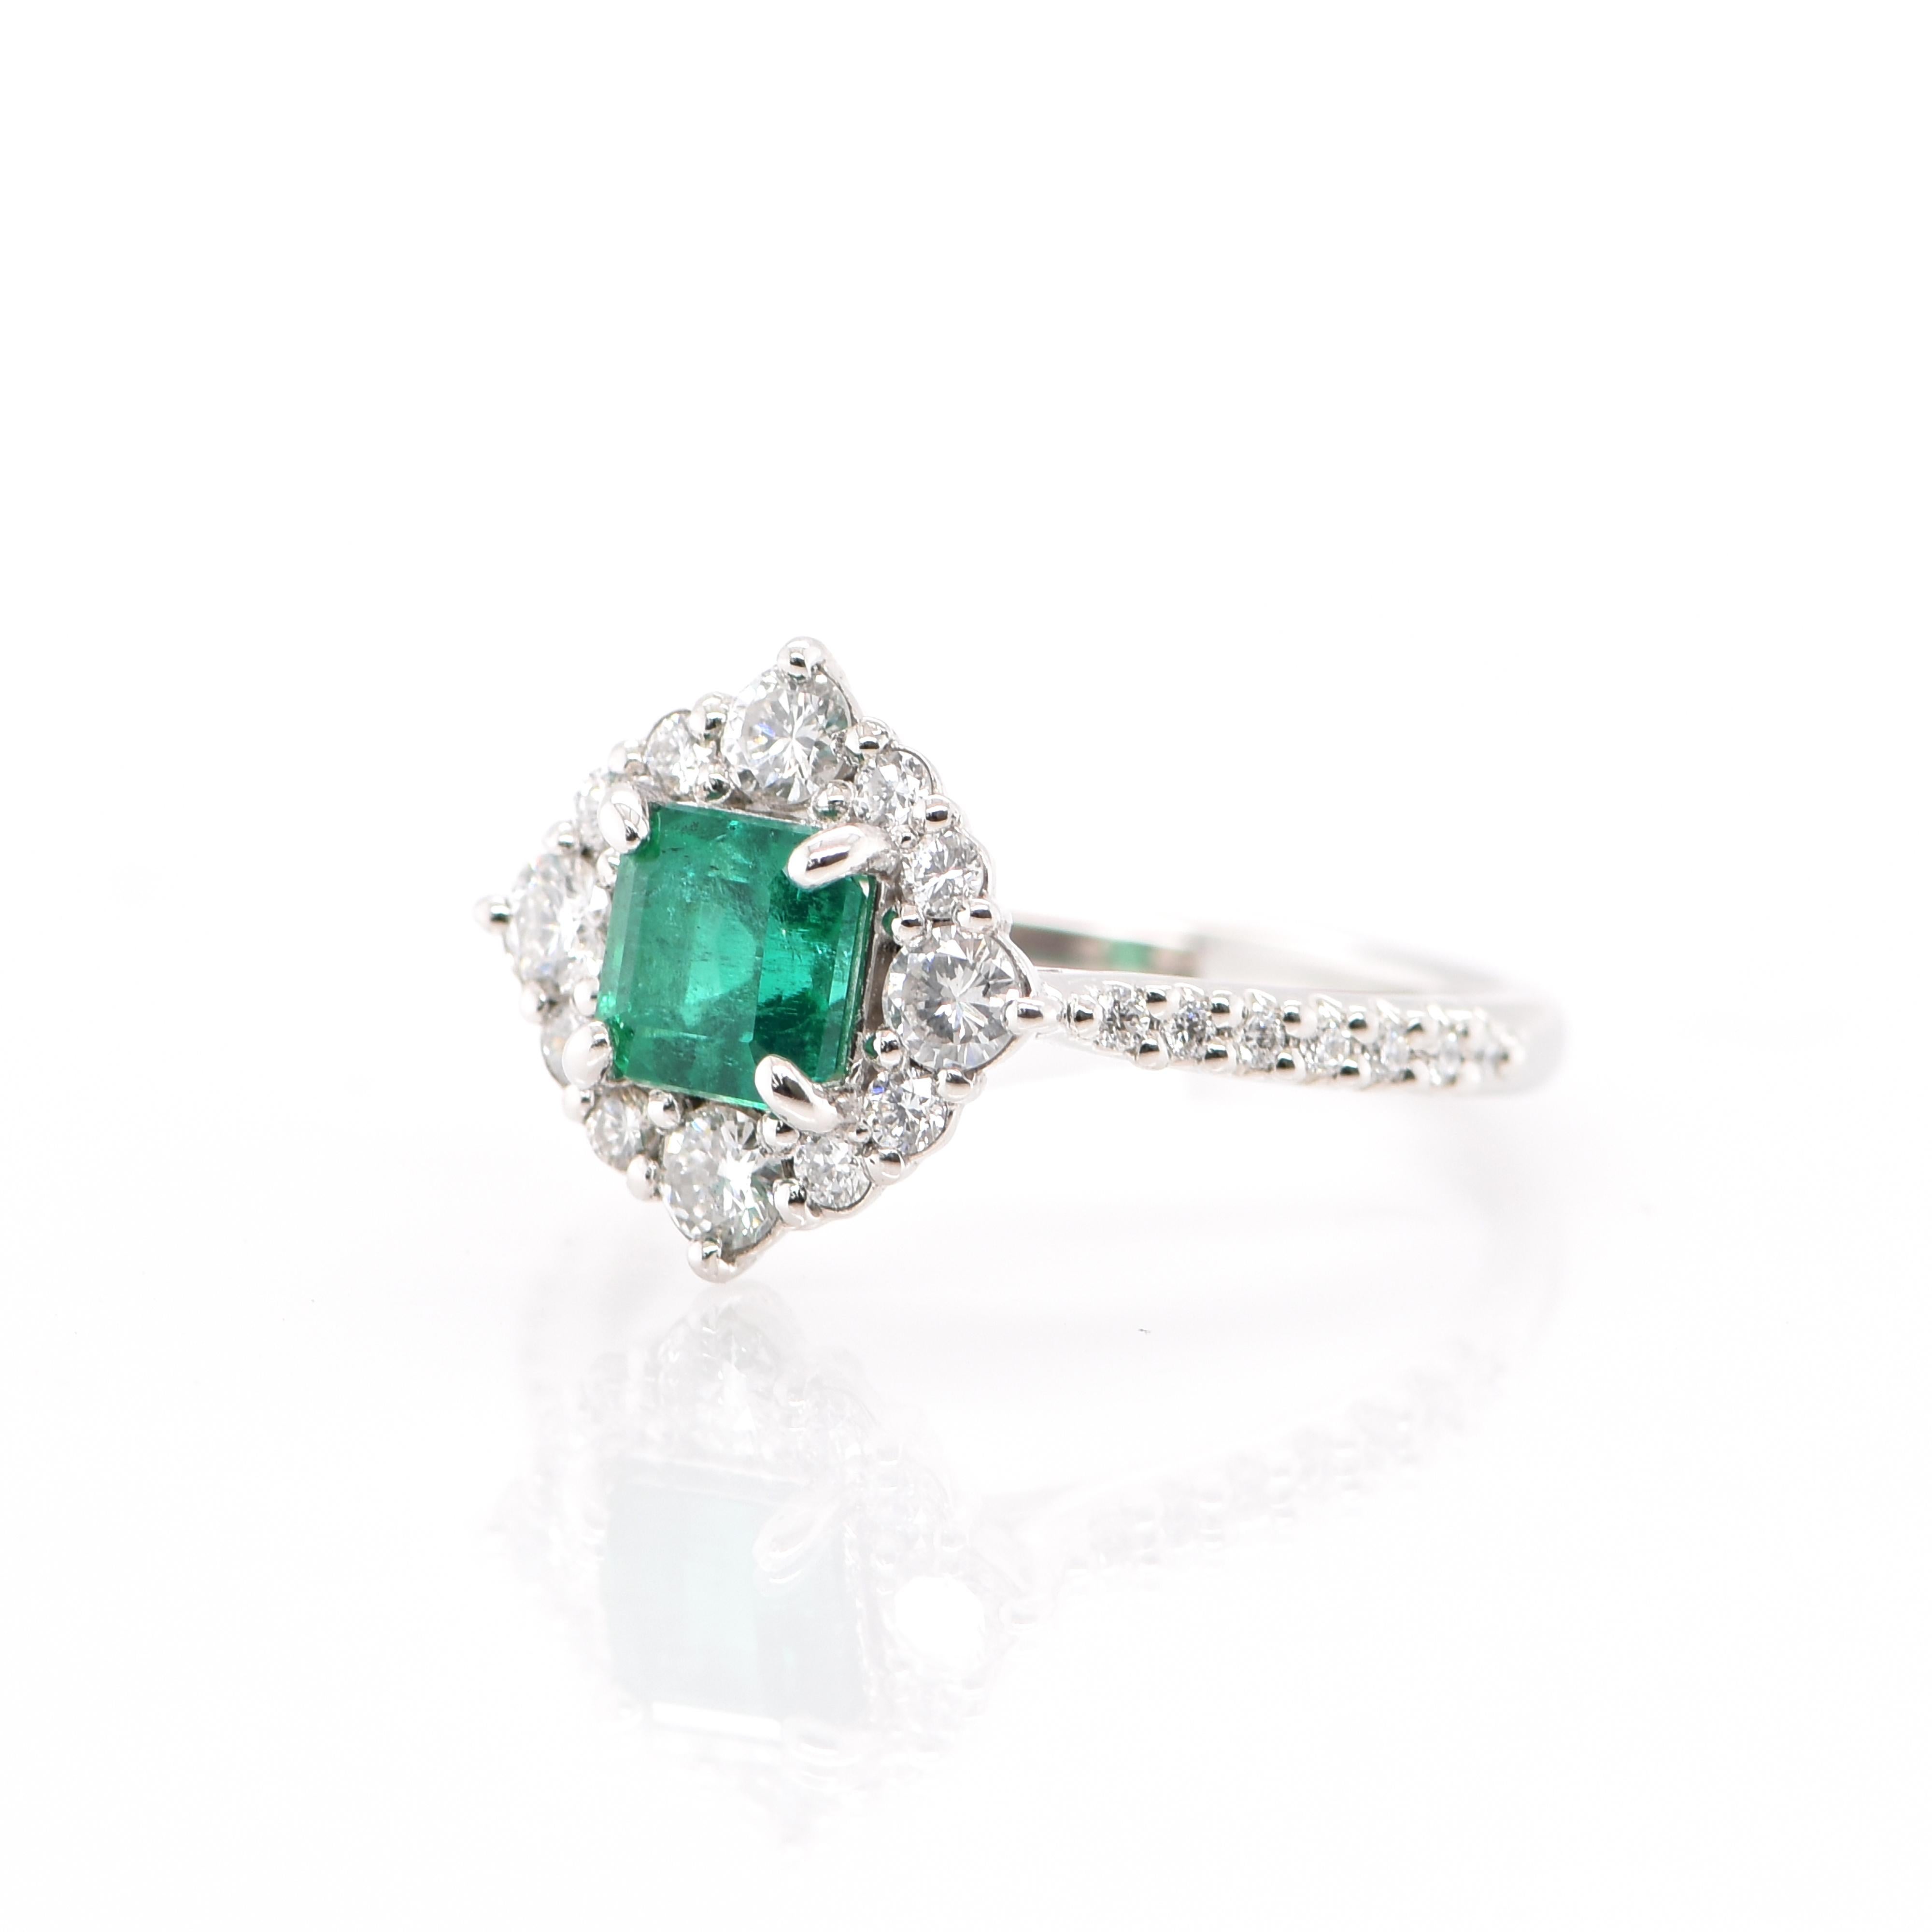 A stunning Halo Engagement Ring featuring a 0.797 Carat Natural Emerald and 0.45 Carats of Diamond Accents set in Platinum. People have admired emerald’s green for thousands of years. Emeralds have always been associated with the lushest landscapes